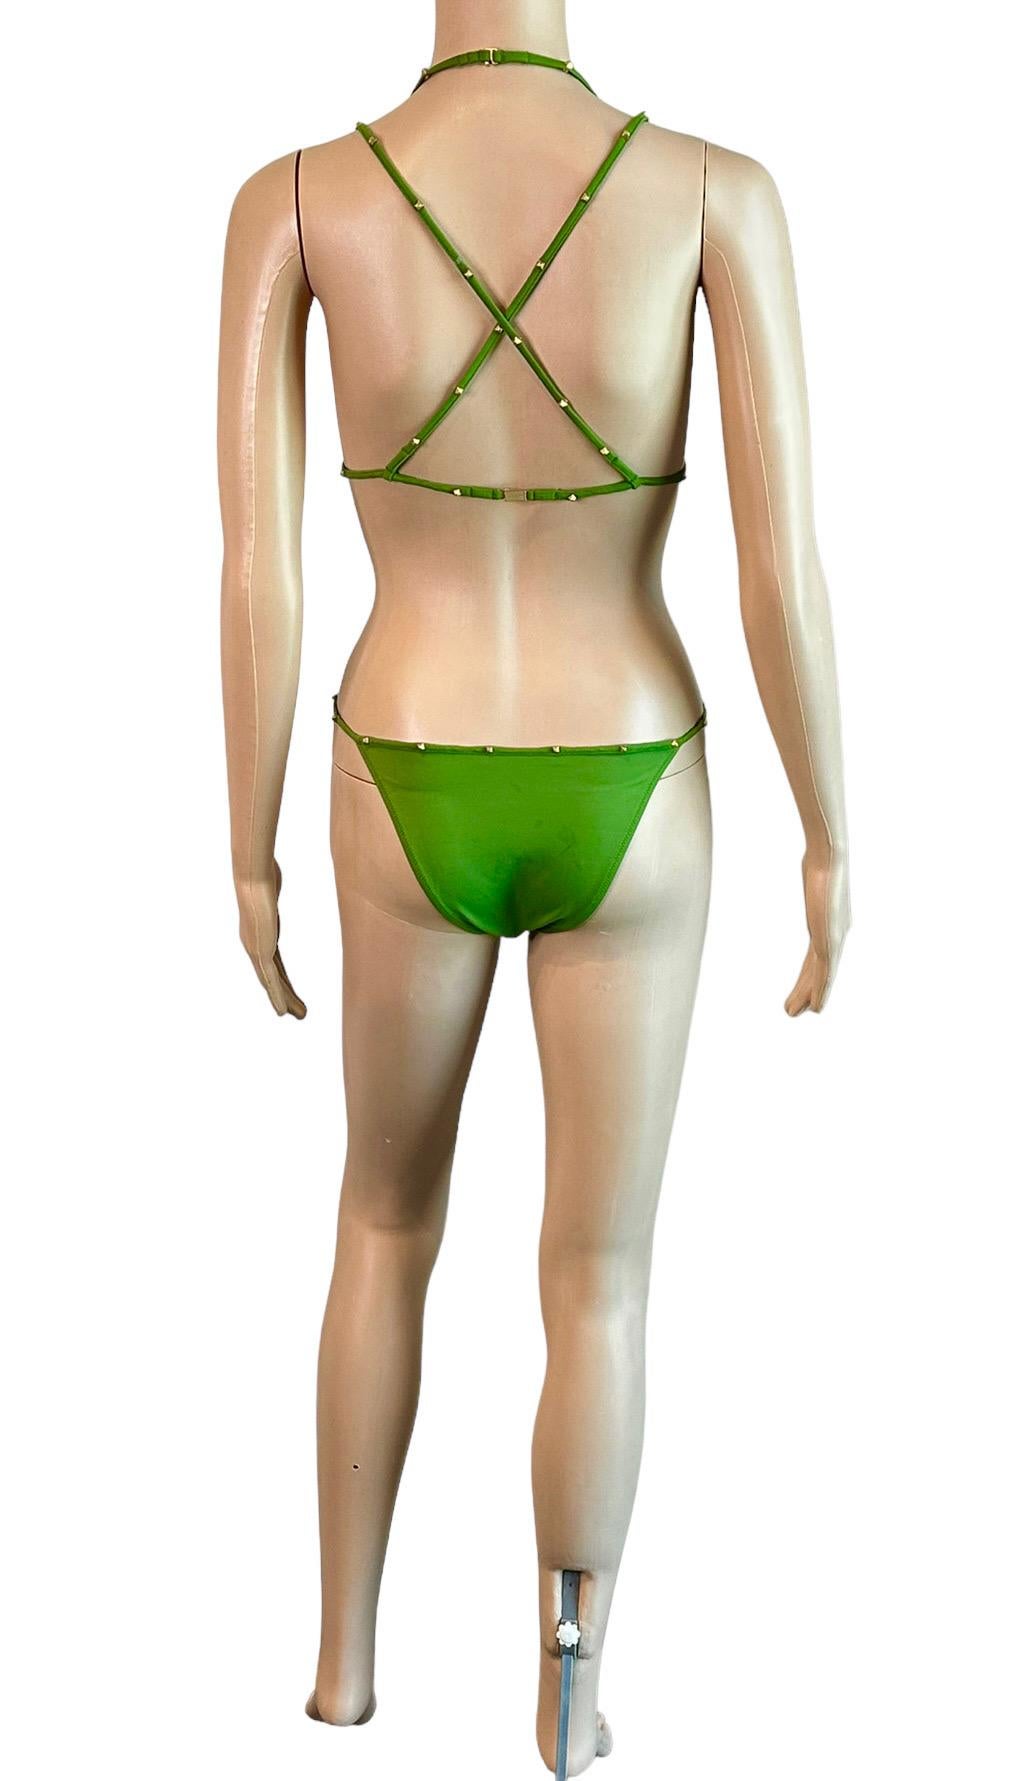 Tom Ford for Gucci F/W 2003 Bondage Studded Two-Piece Bikini Swimsuit Swimwear In Good Condition For Sale In Naples, FL